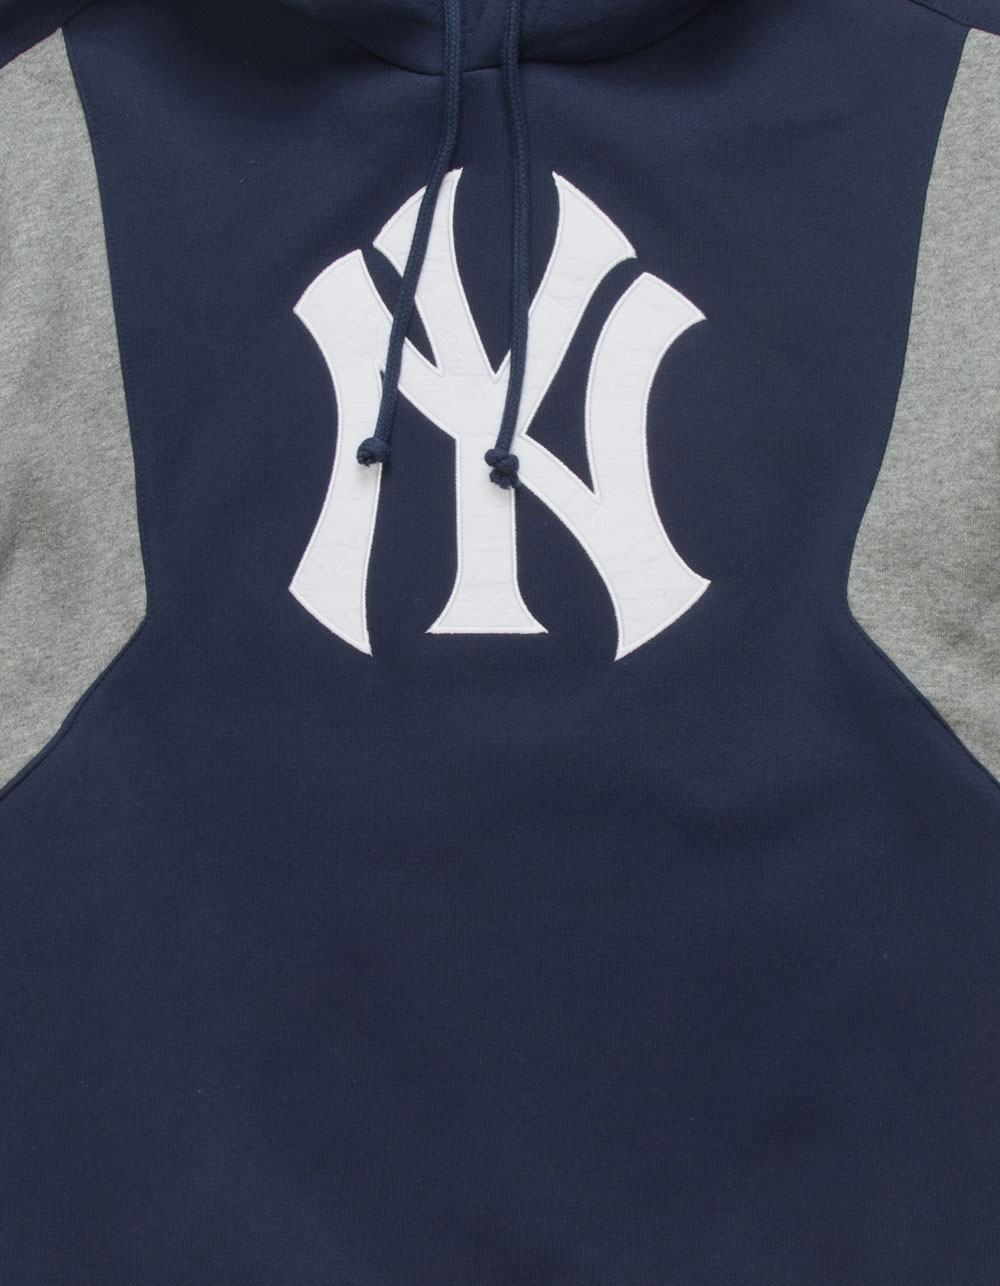 Authentic New York Yankees Clubhouse Hoodie Marble Large Reg. $74.99